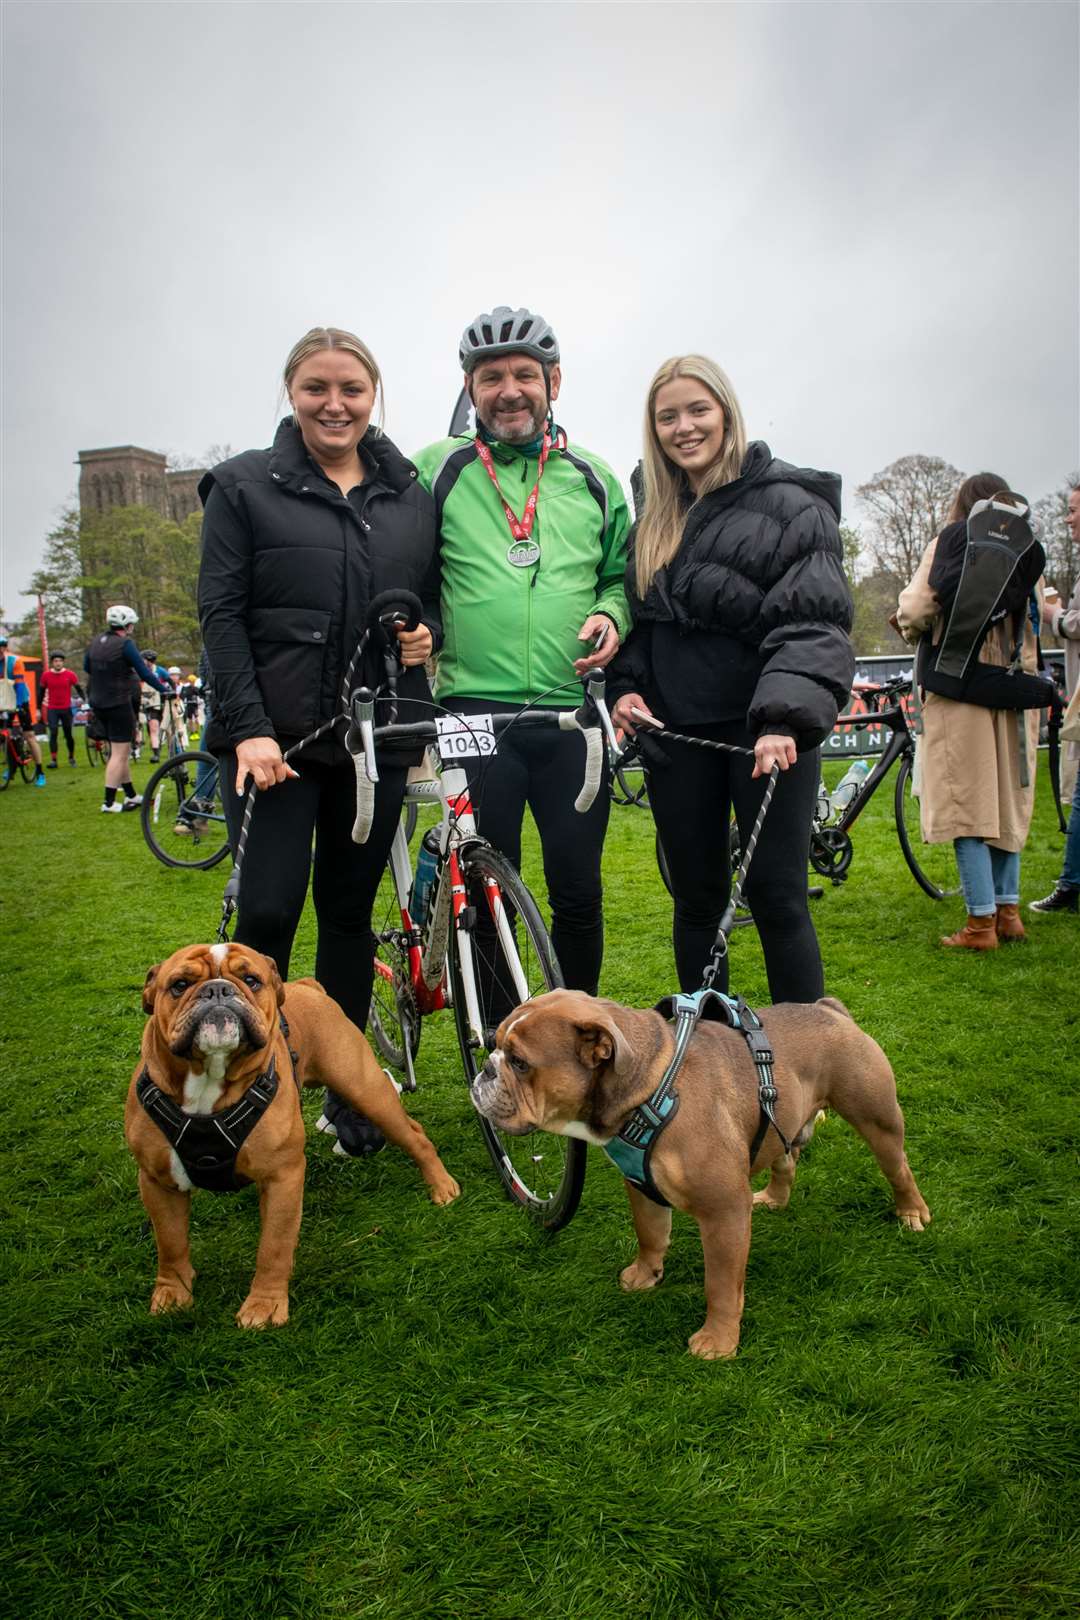 Kirsty, Ali and Katie Mcculloch with dogs Wilson and Smith.